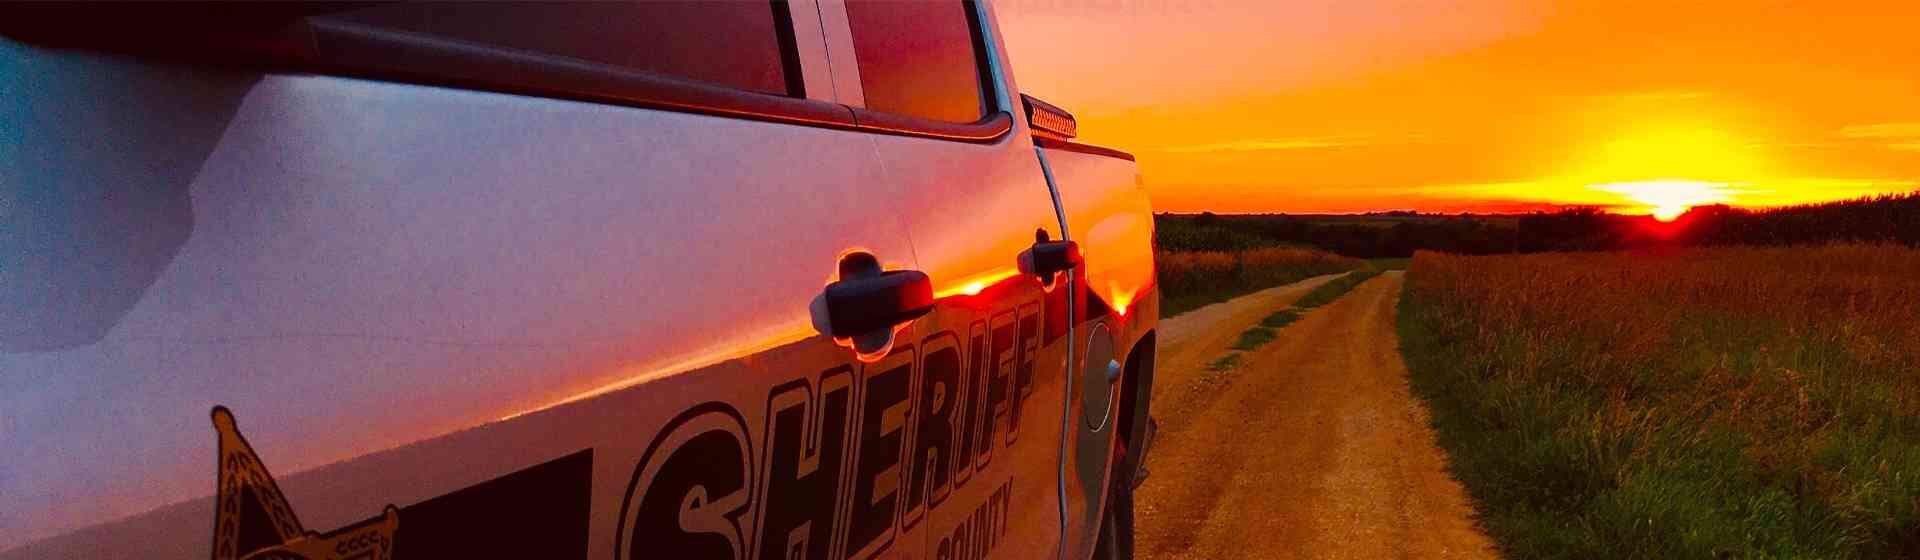 Atchinson Sheriff vehicle driving away from the sun setting.